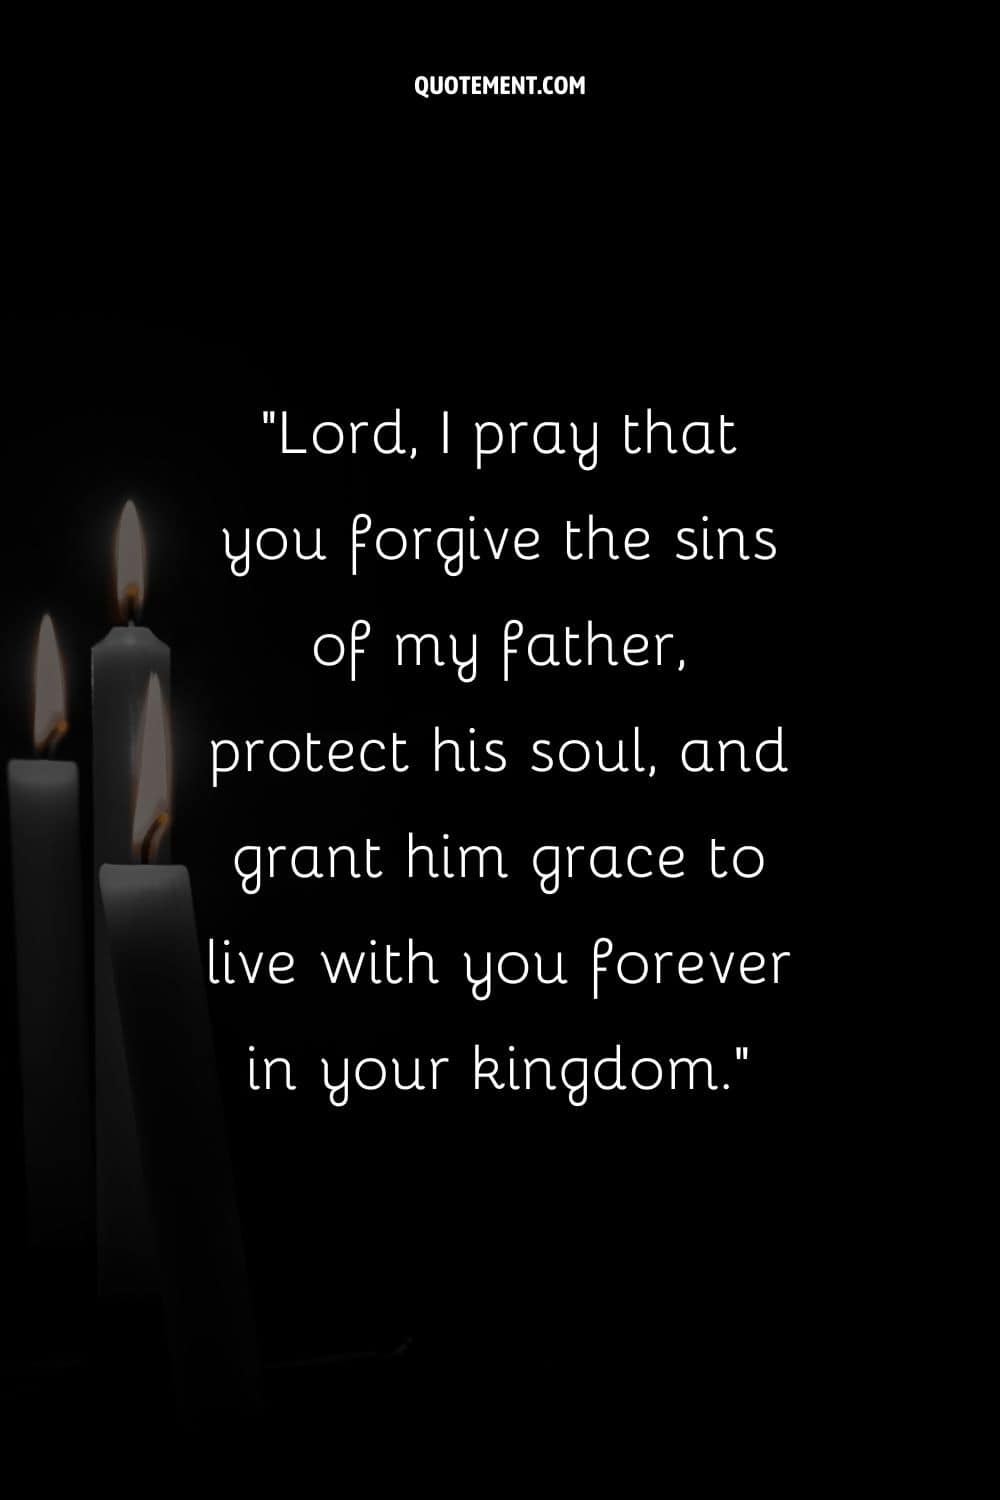 Burning candles image representing prayer quote for a father.